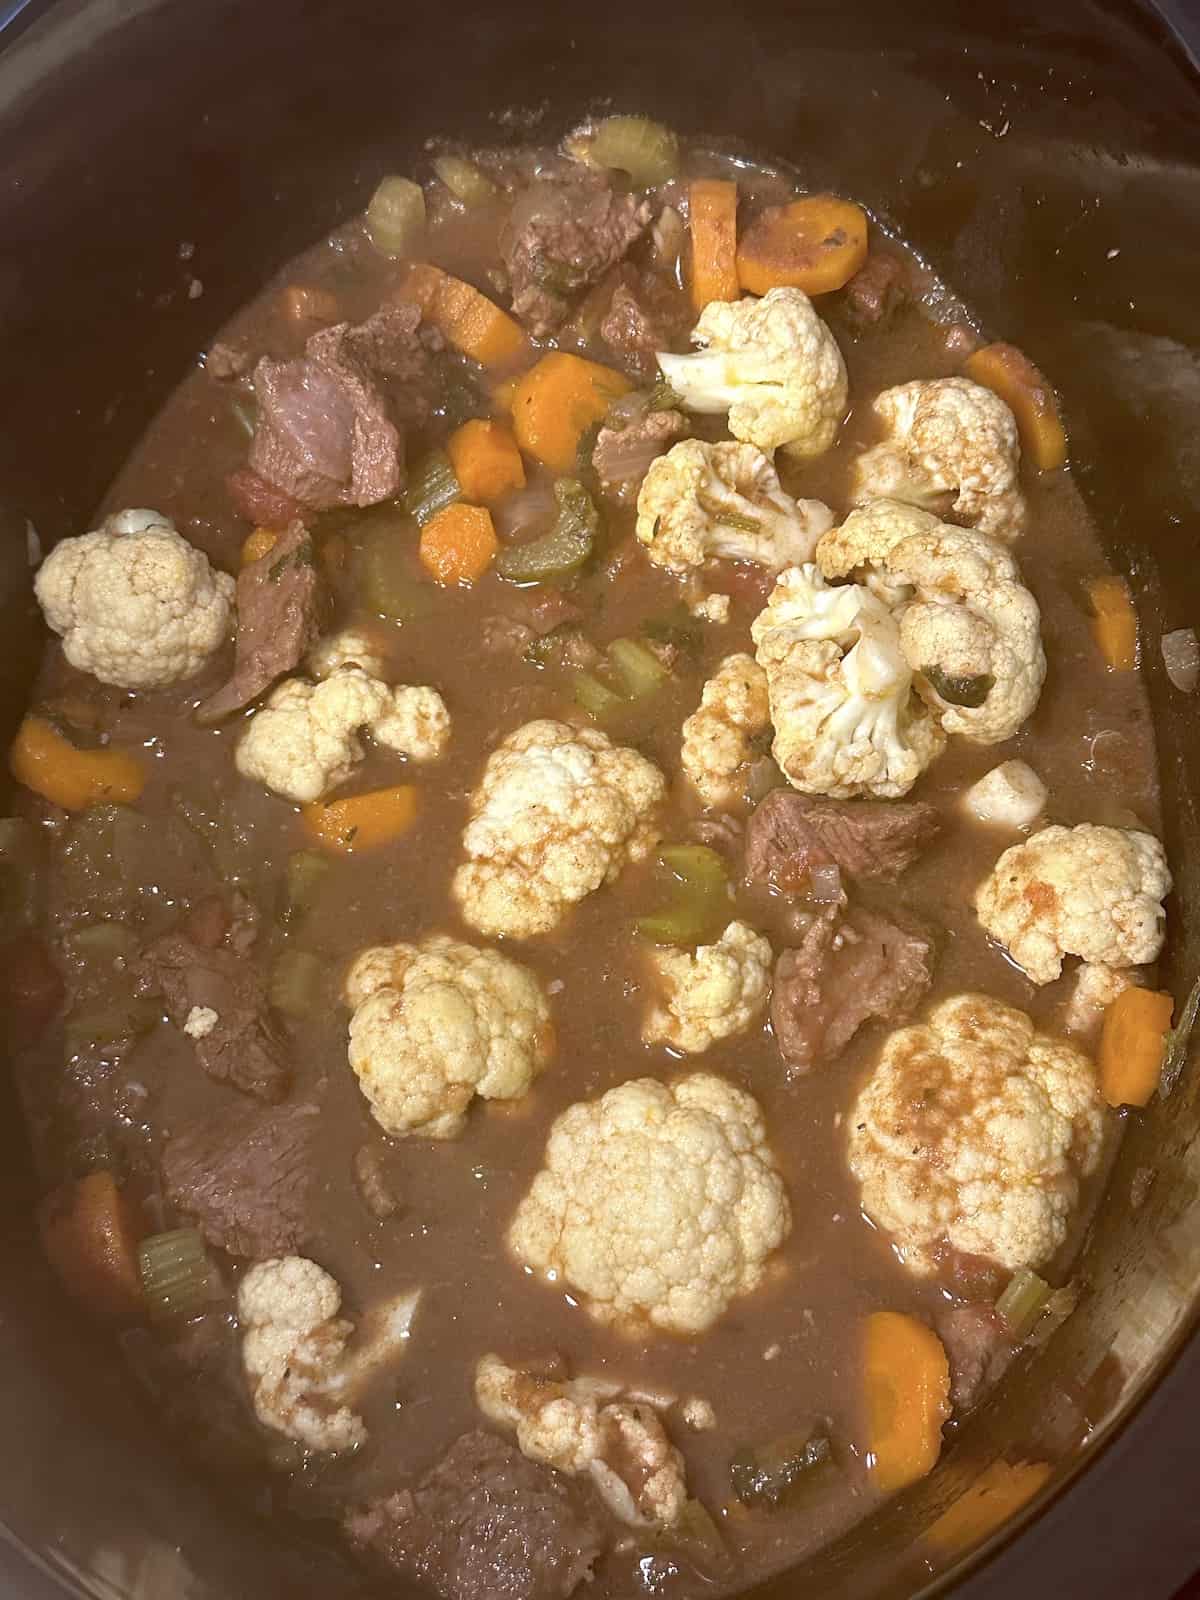 cauliflower added to the slow cooker with witches stew ingredients